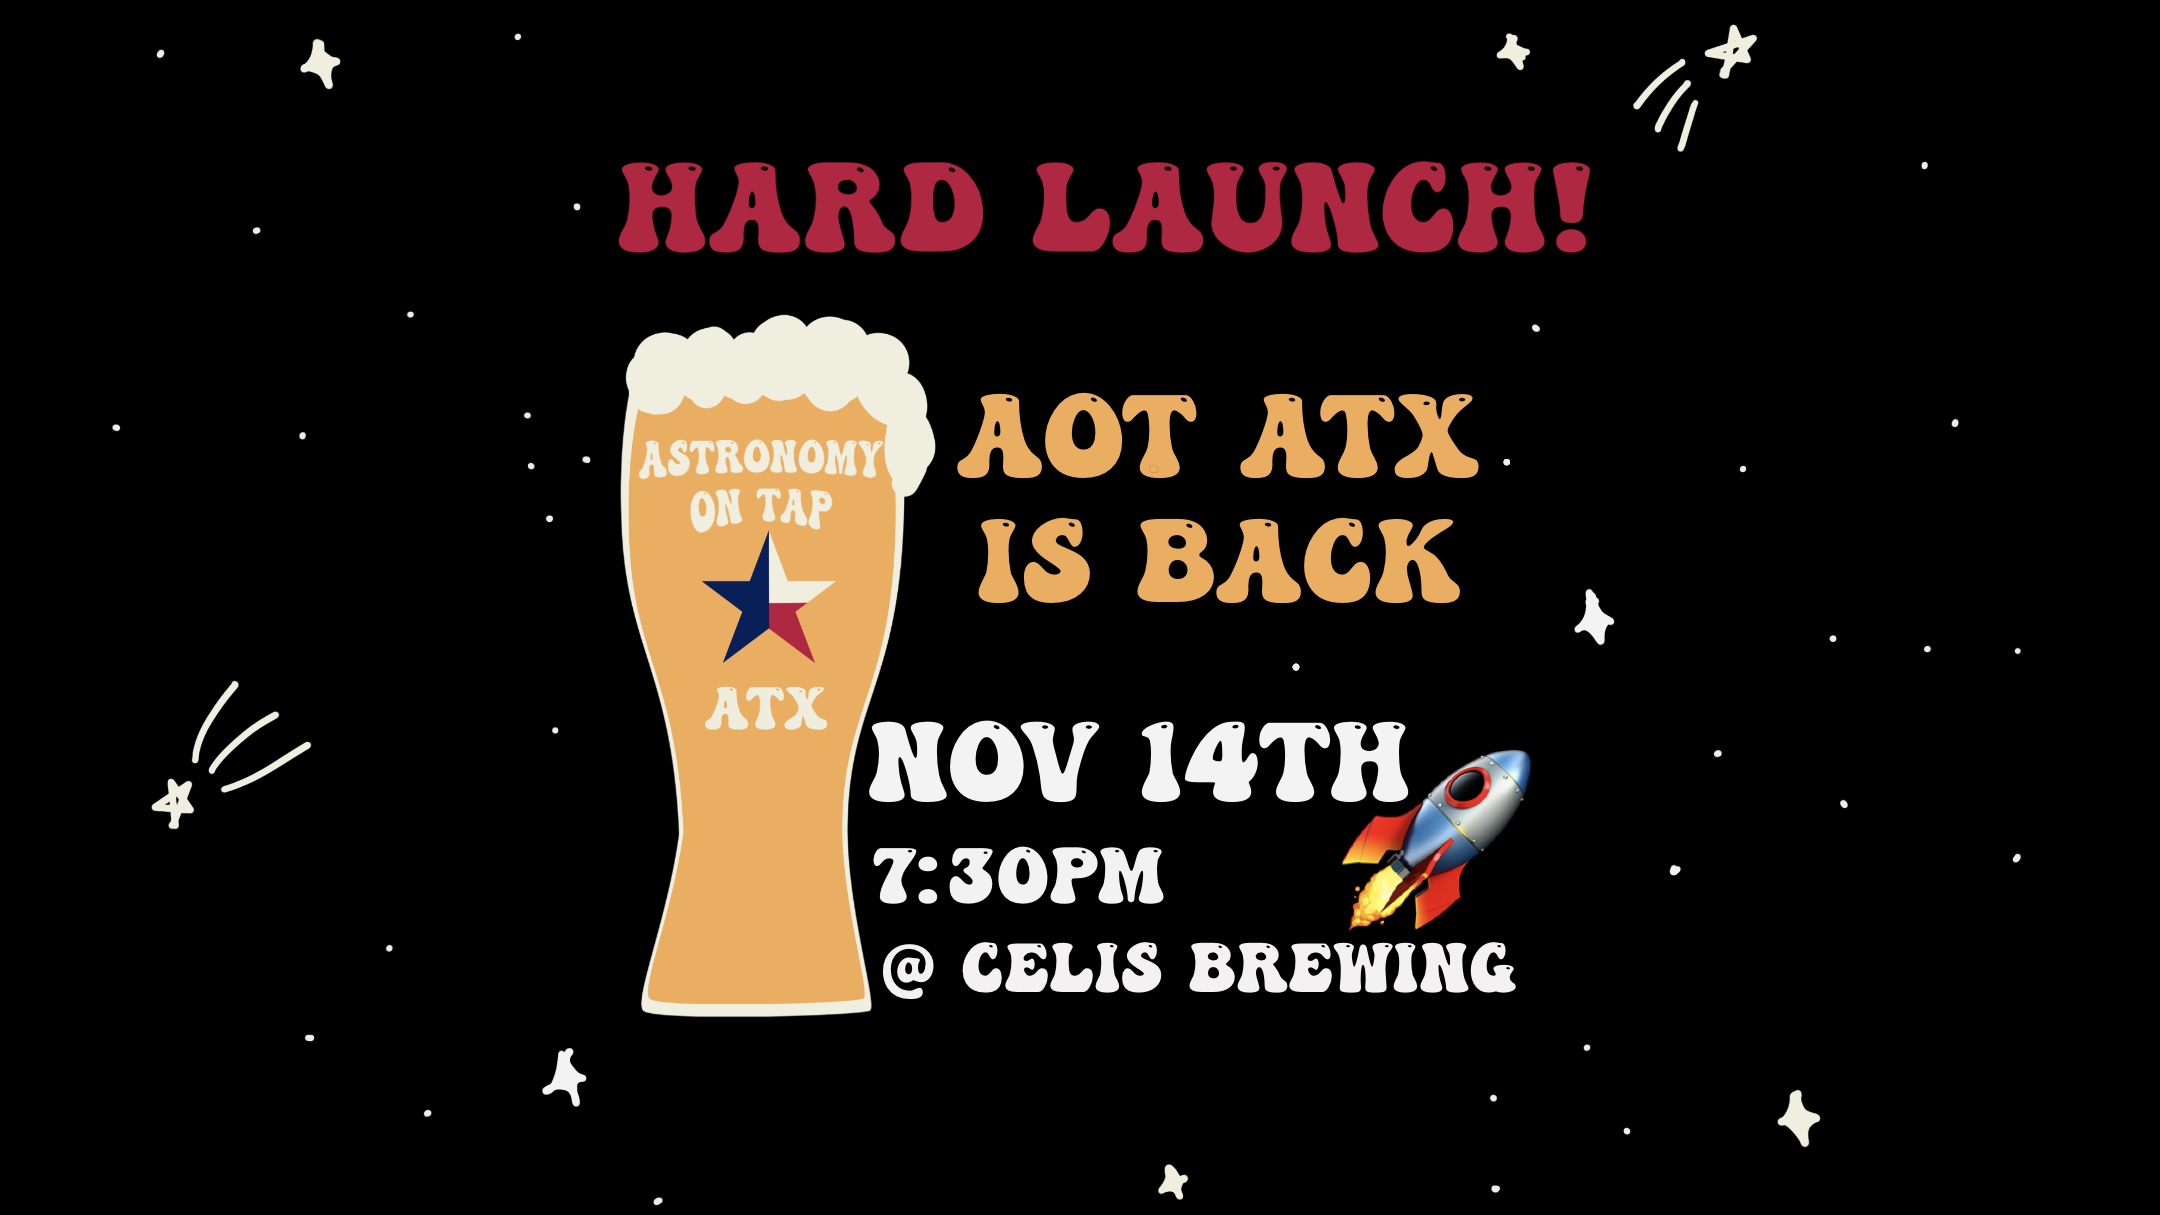 A black background with white stars and text overtop that reads "Hard Launch! AoT ATX is back, Nov 14th @ 7:30 pm at Celis Brewing"